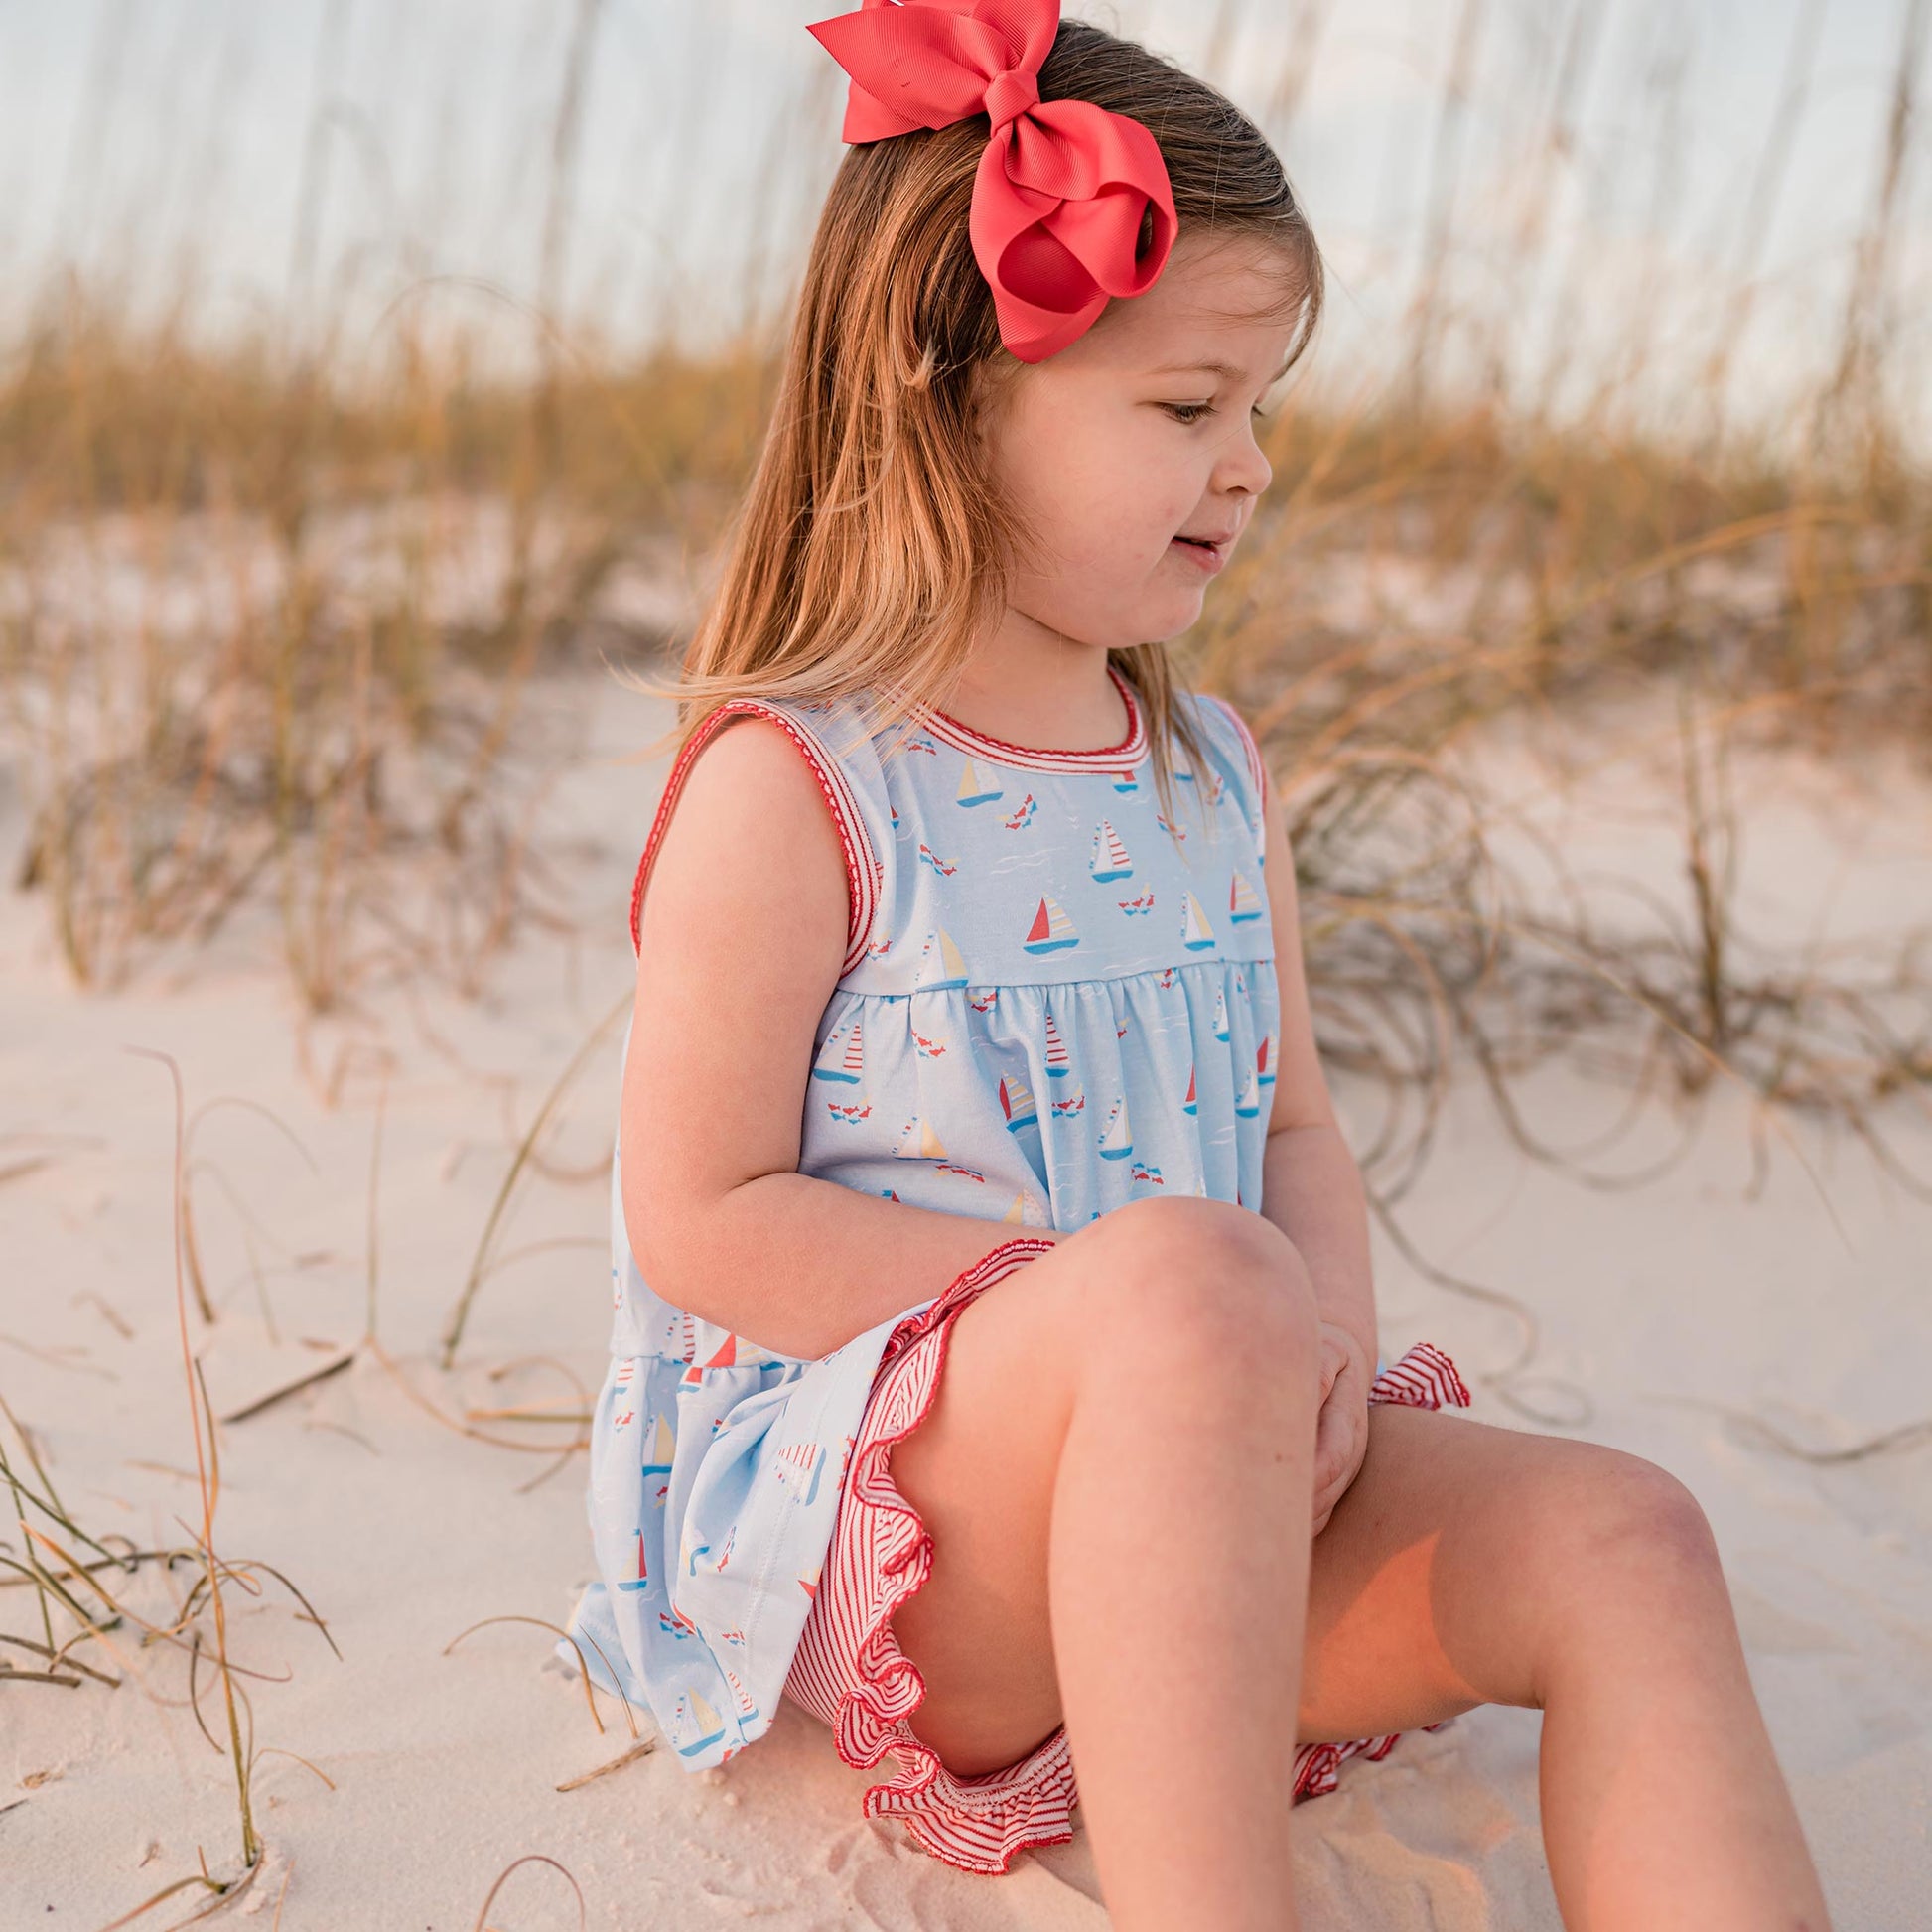 little girl sitting at the beach with a big red bow in her hair